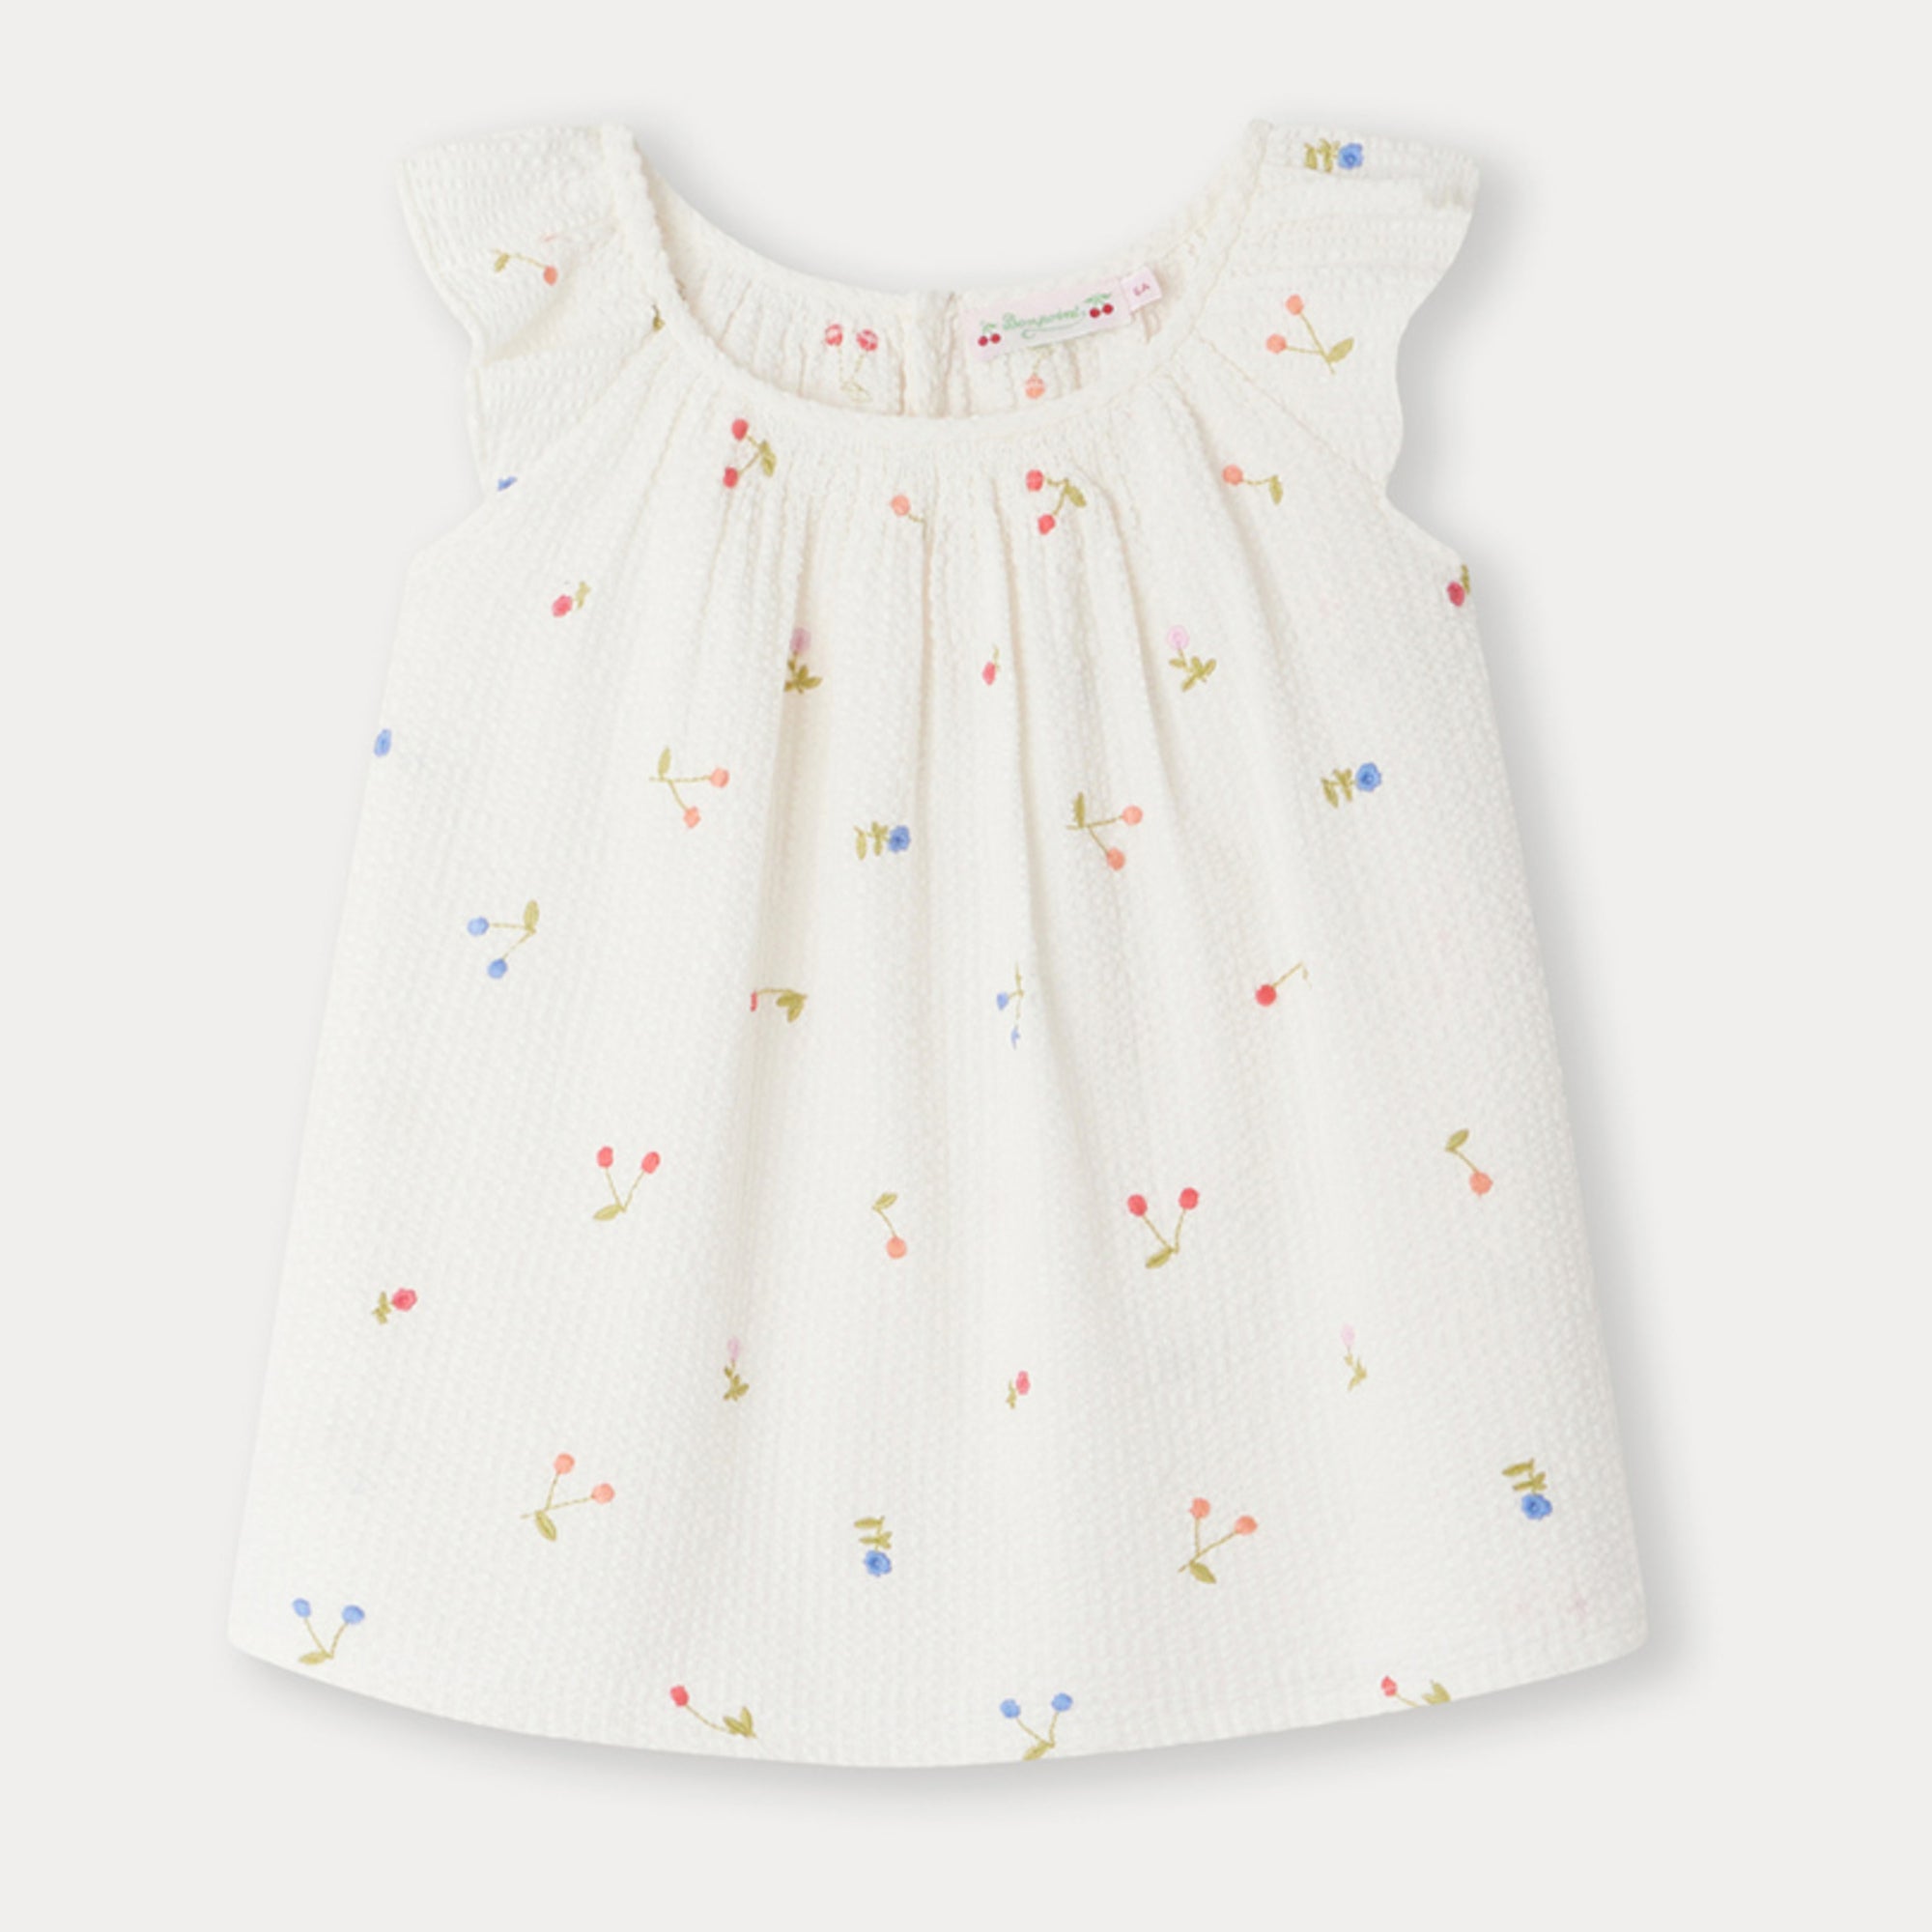 Girls White Cherry Embroidered Cotton Top